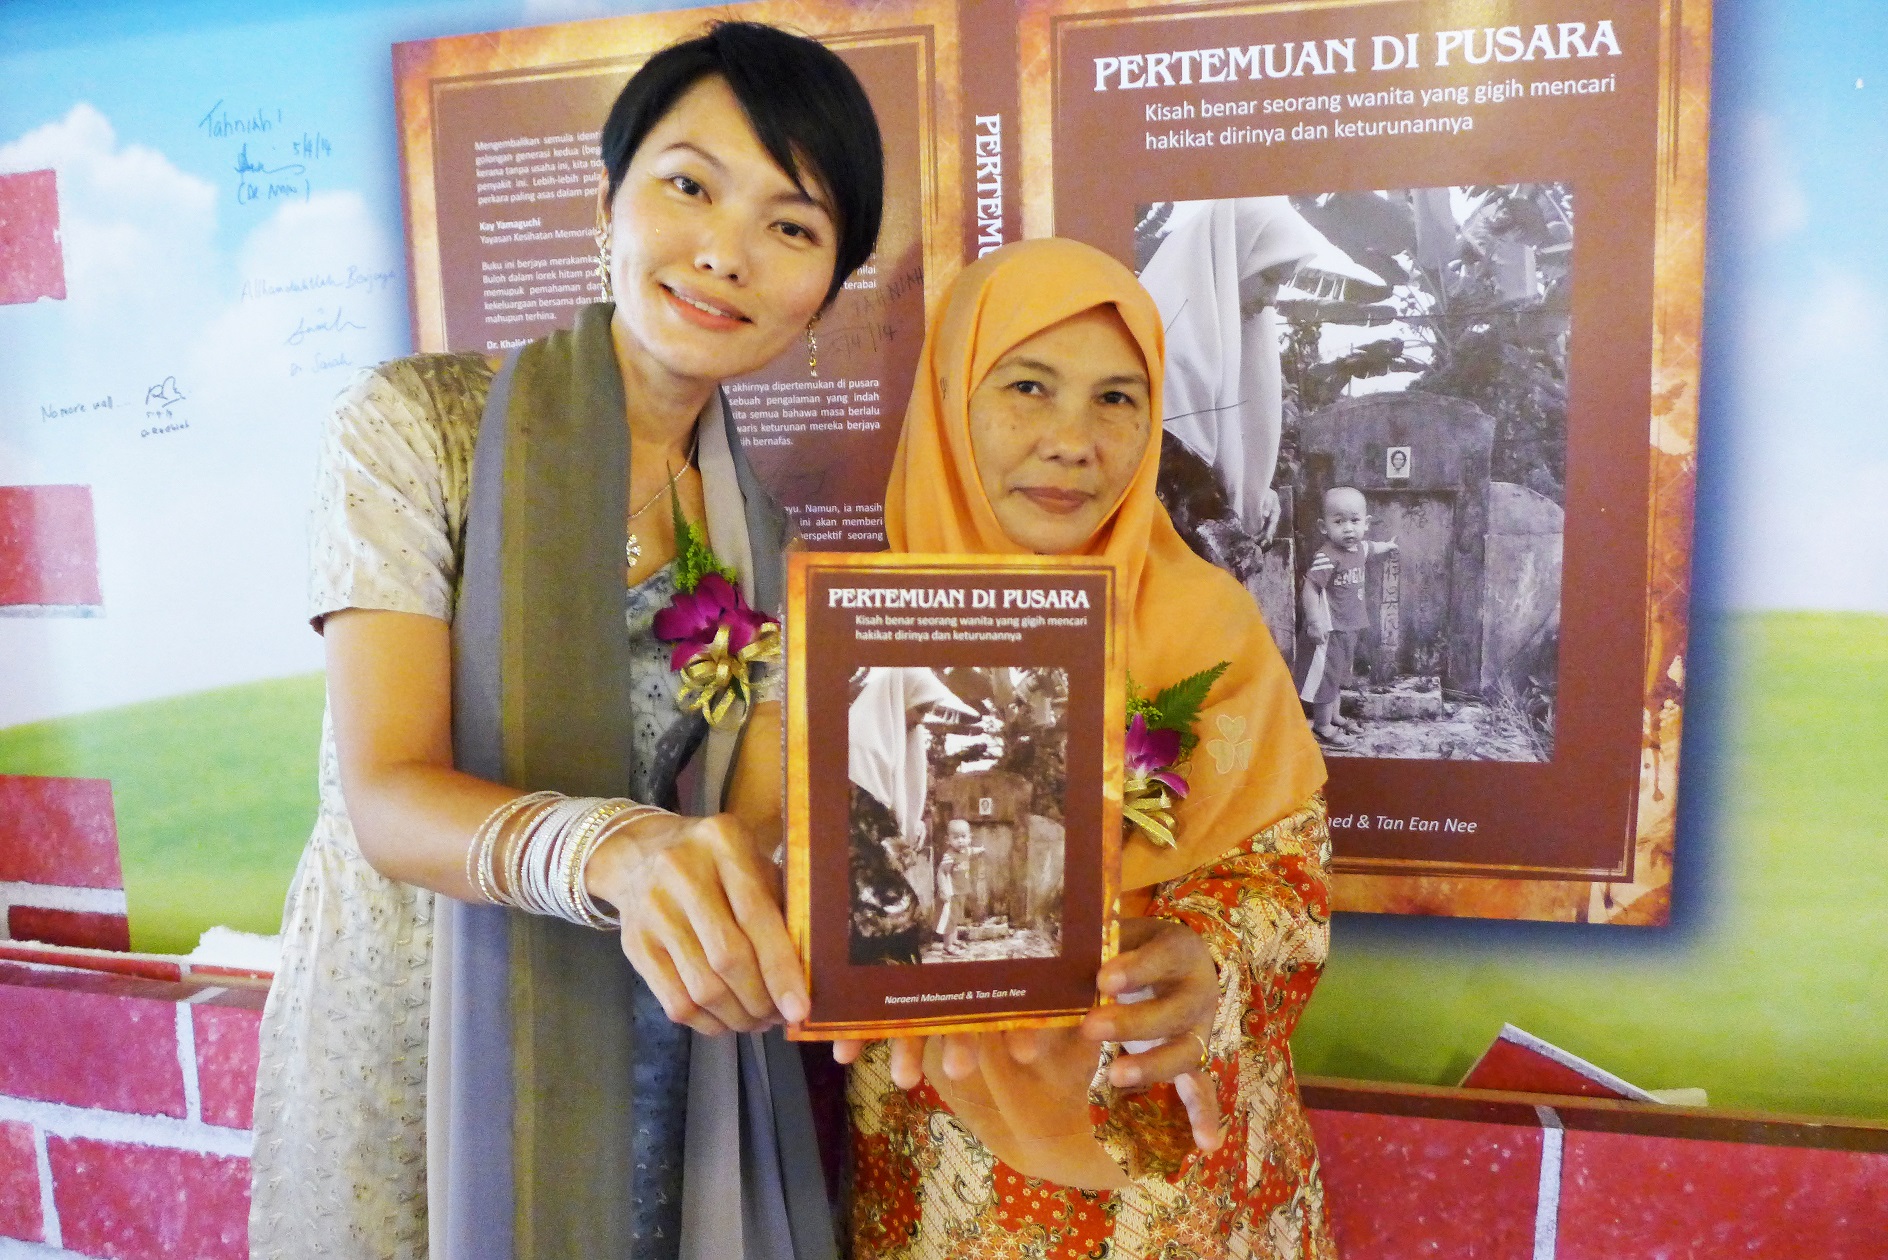  Pertemuan Di Pusara, Malay Edition, co-authored by Noraeni Mohamed &amp; Tan Ean Nee, 2014. (photo by Tan Ean Nee) 